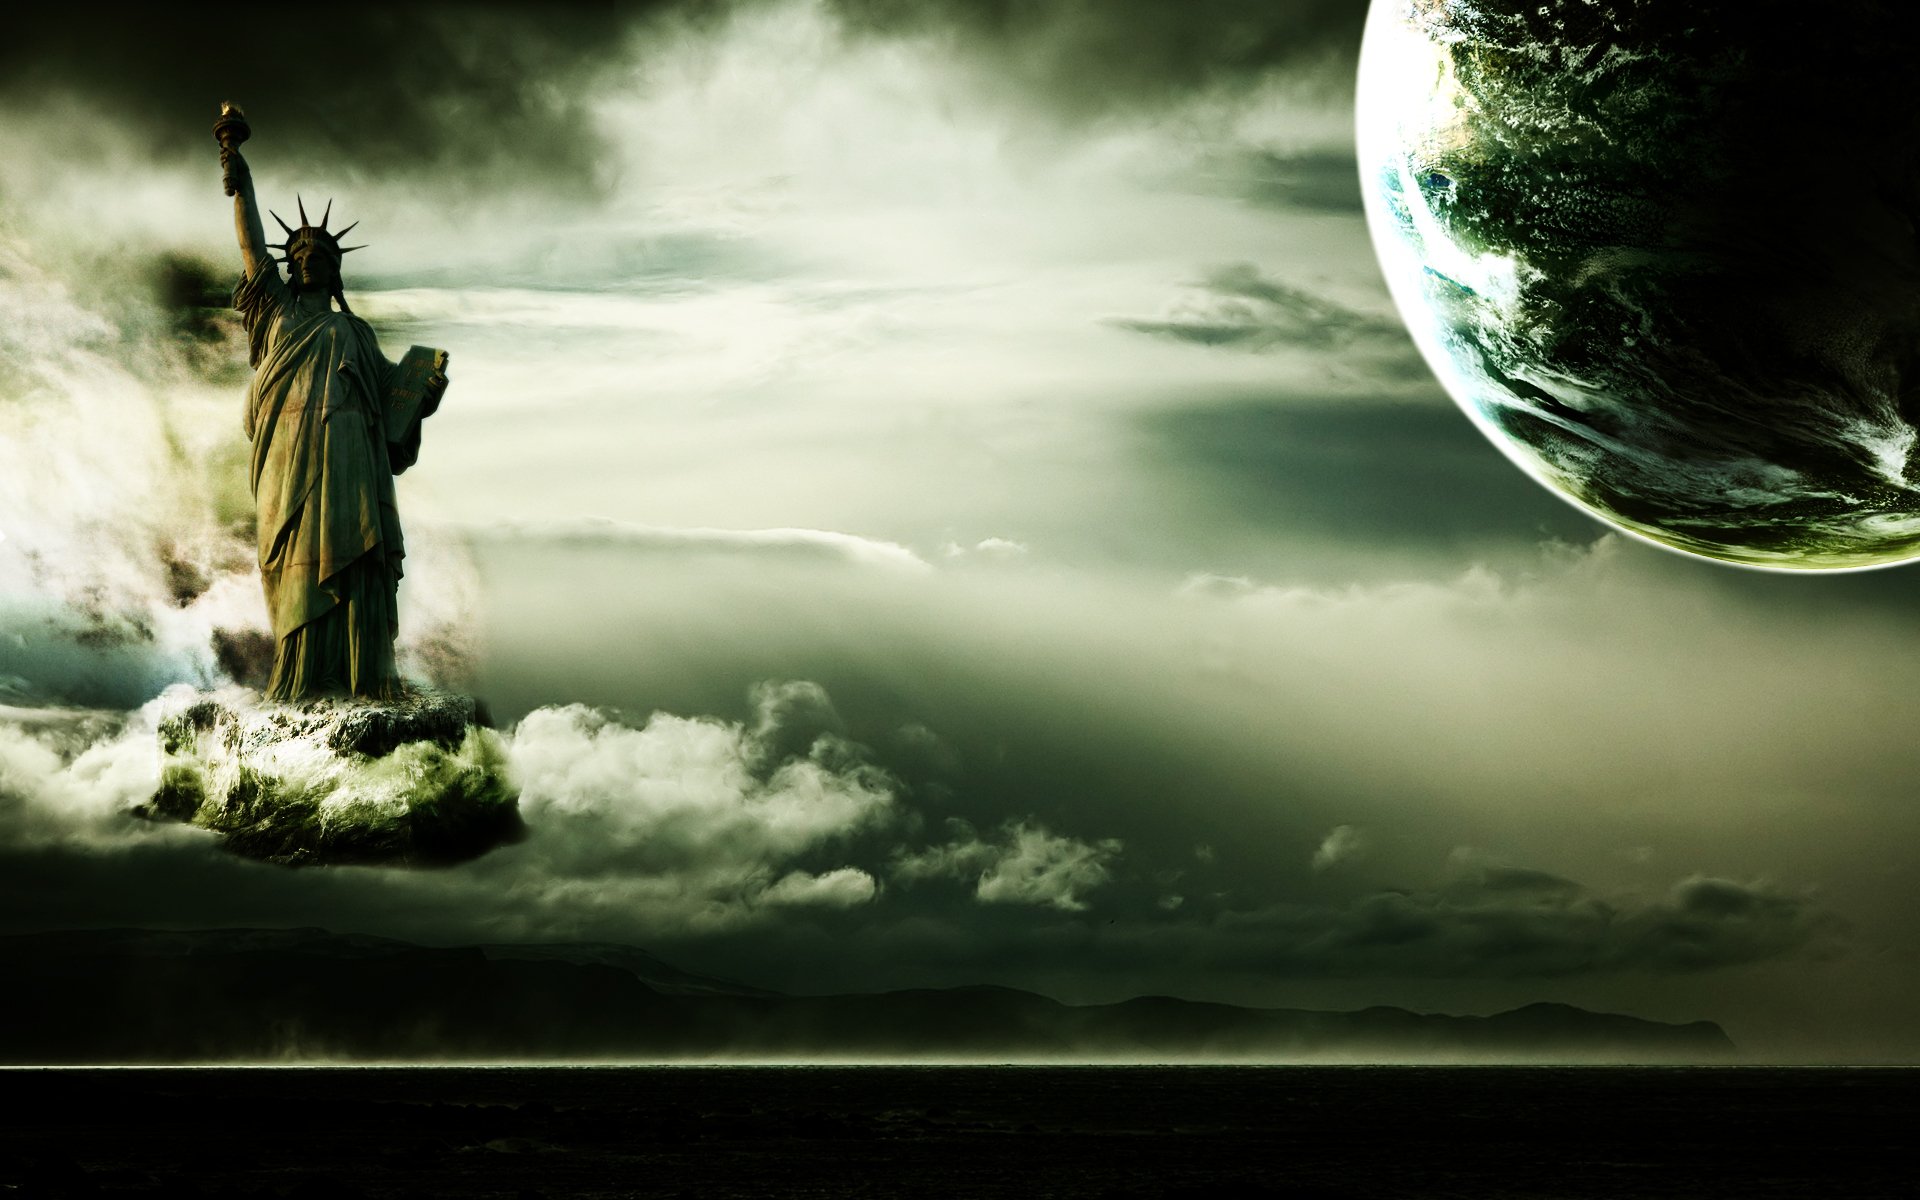 surreal wallpapers, photos and desktop backgrounds up to 8K 7680x4320 resolution